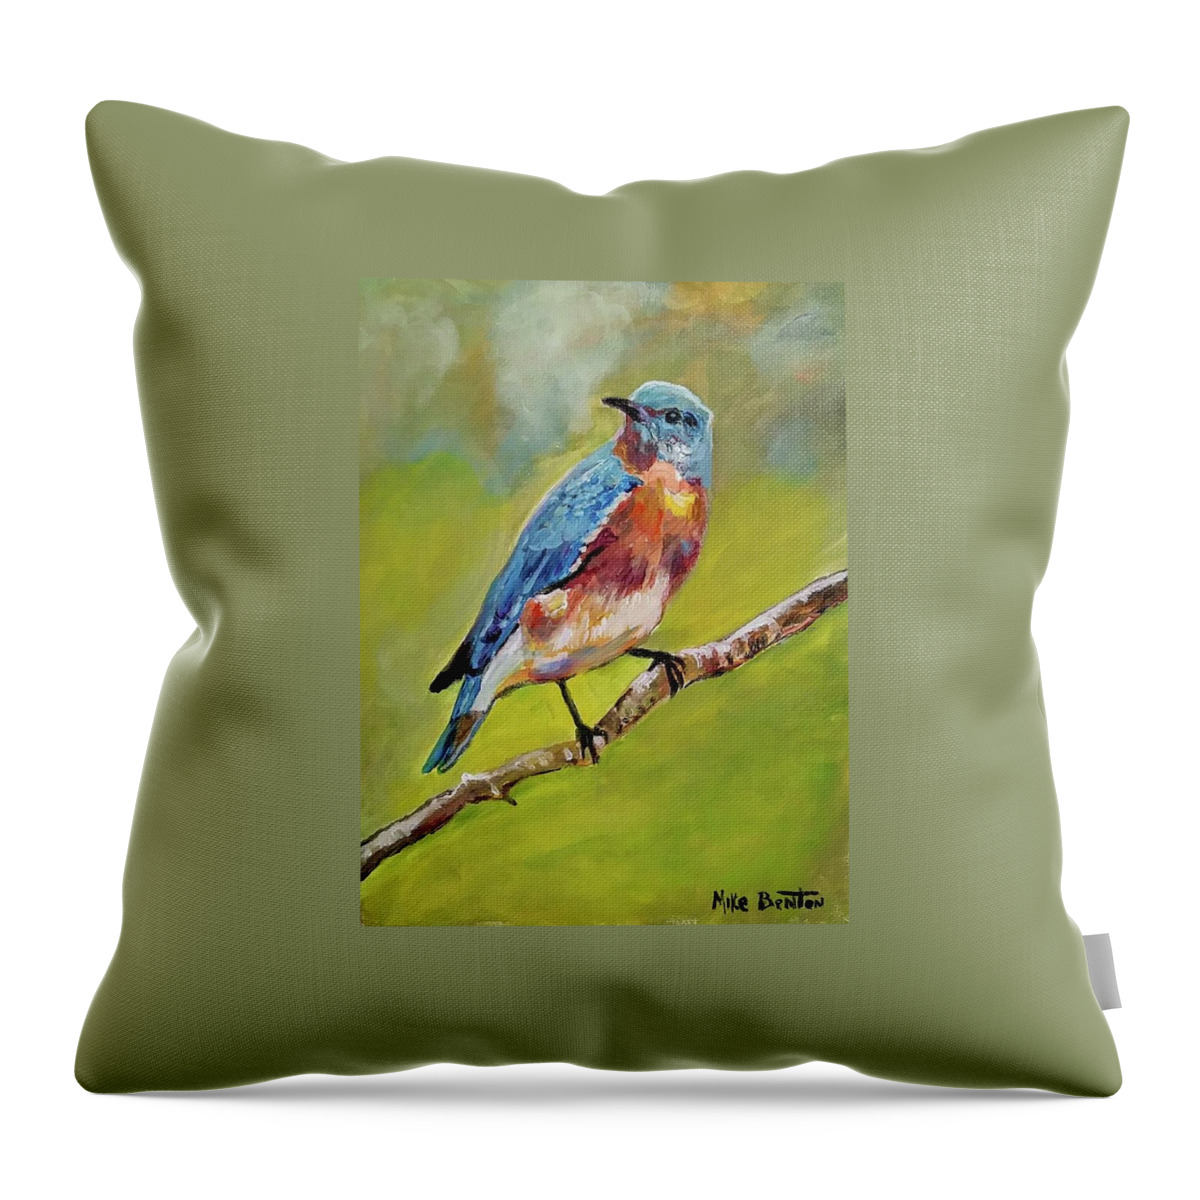 Birds Throw Pillow featuring the painting Bluebird by Mike Benton